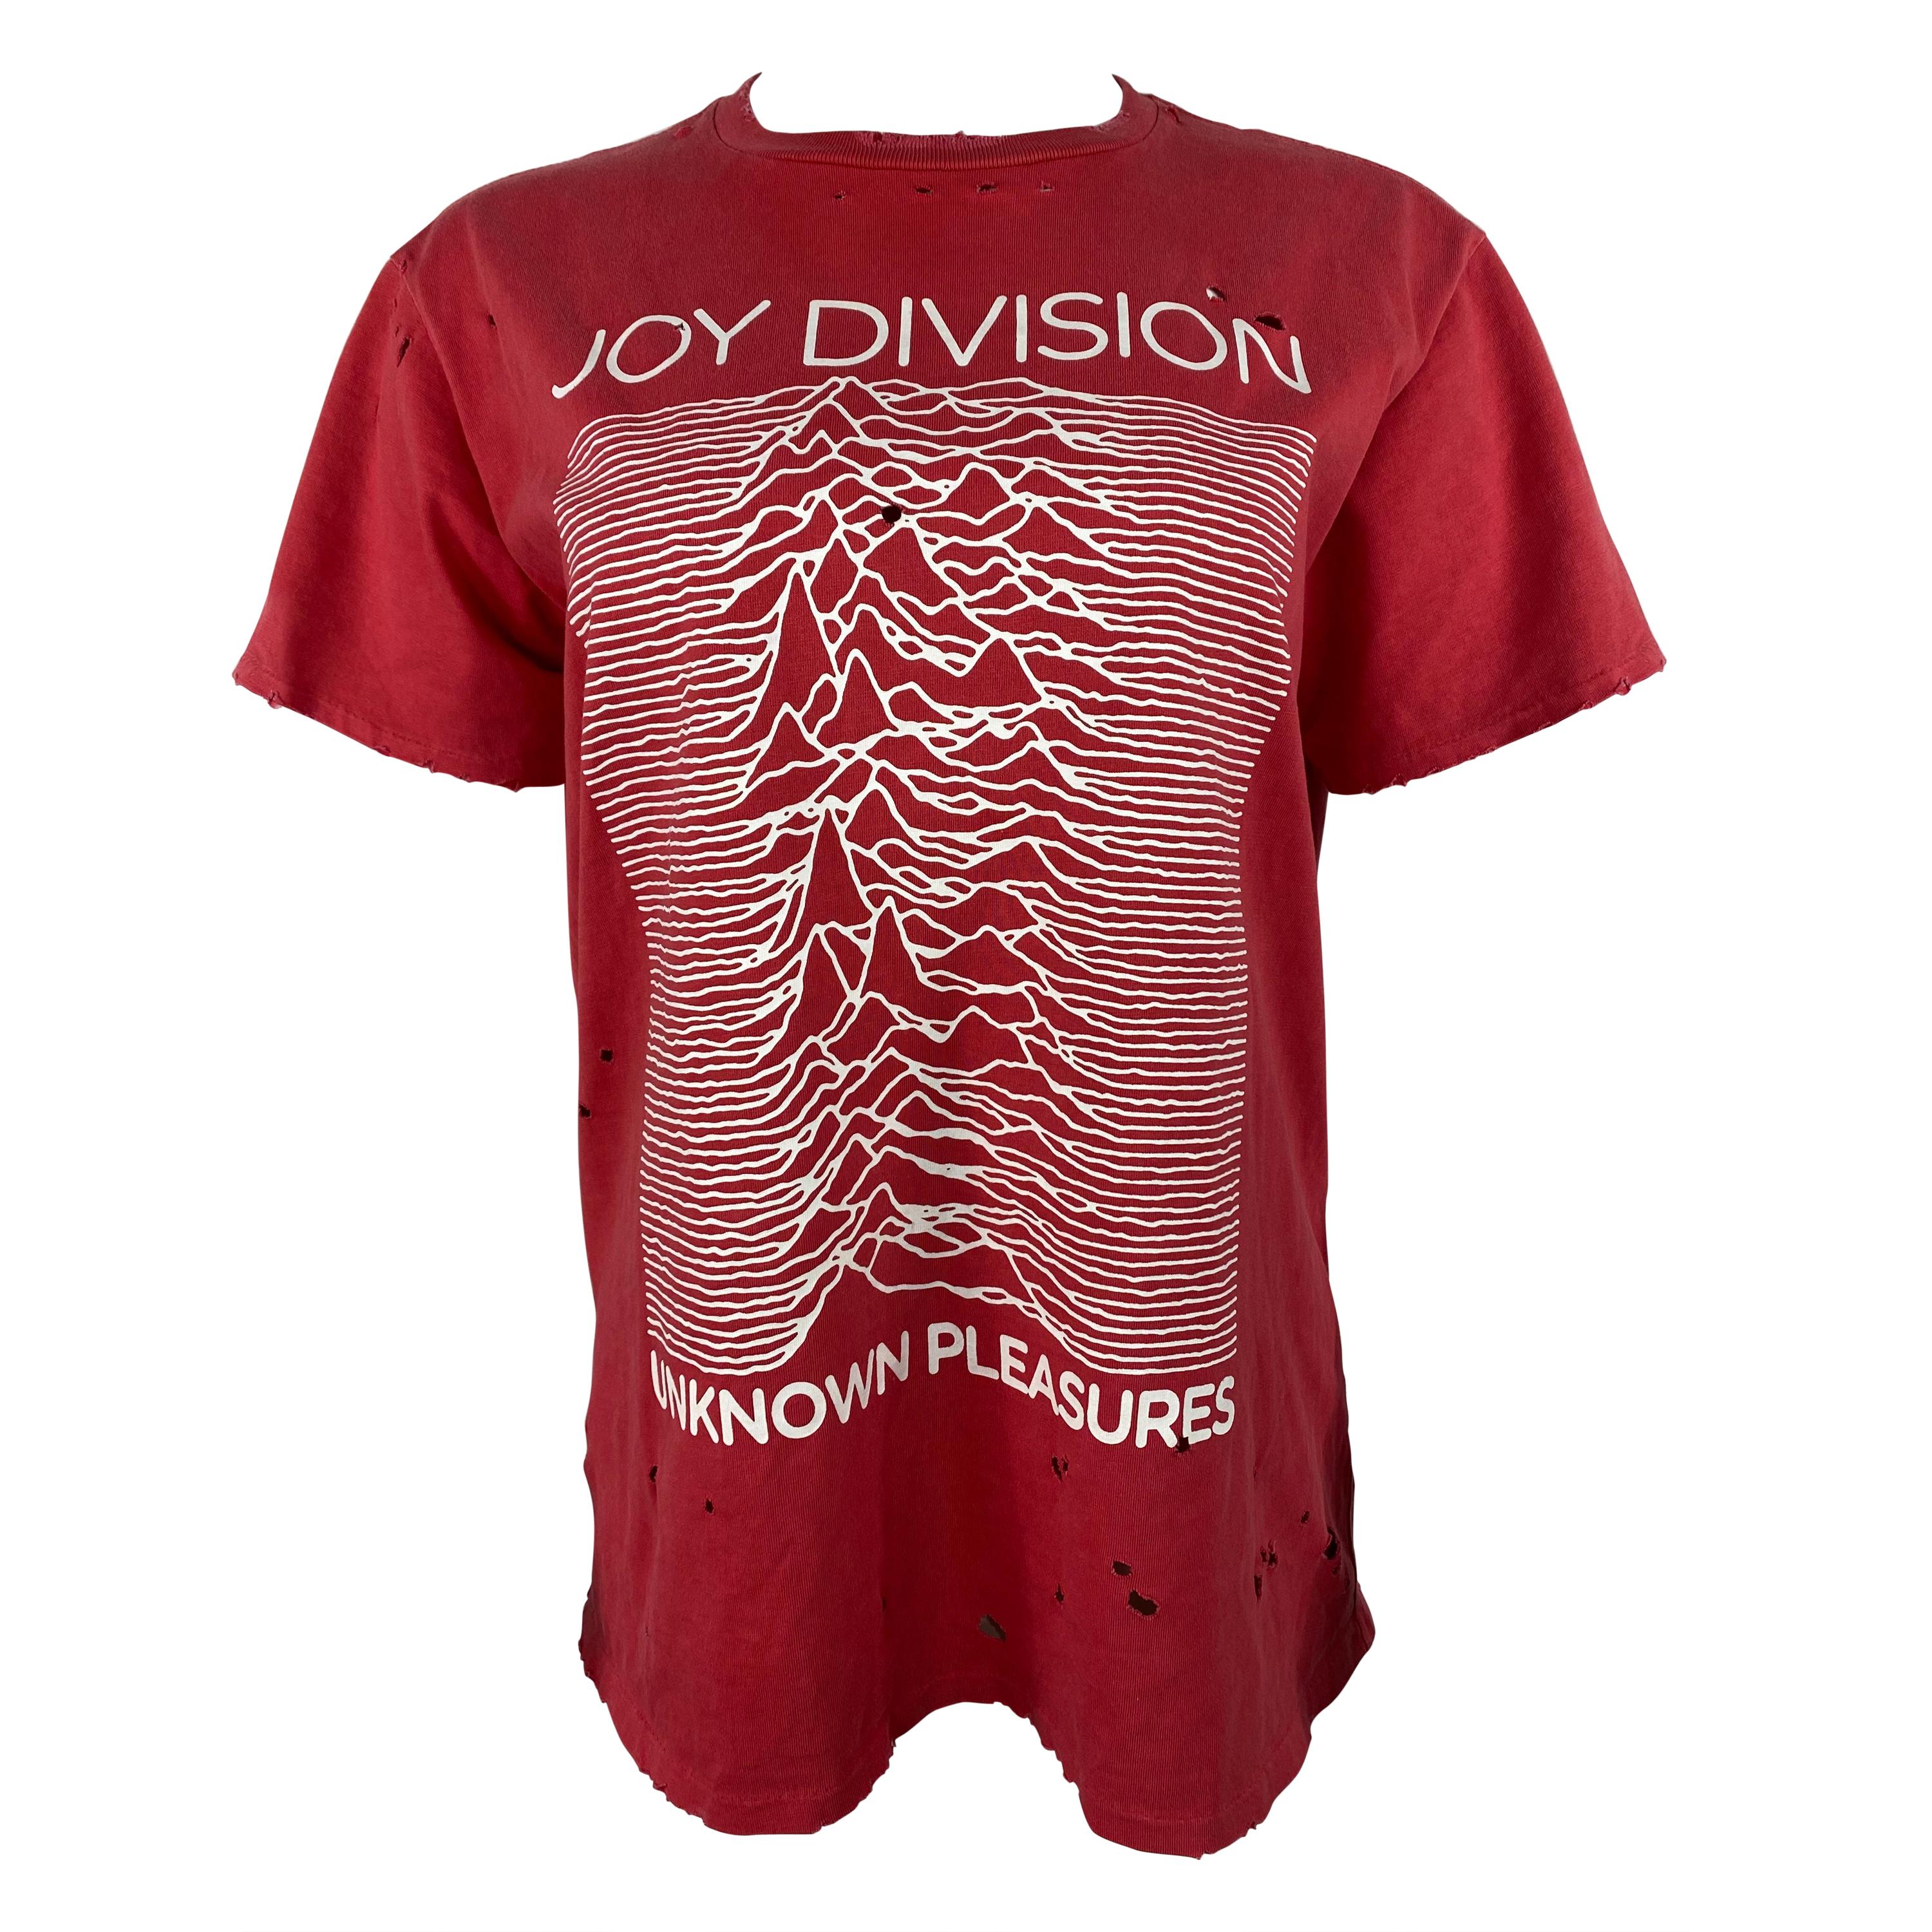 R13 Joy Division Red and White Graphic T-shirt, Size Small